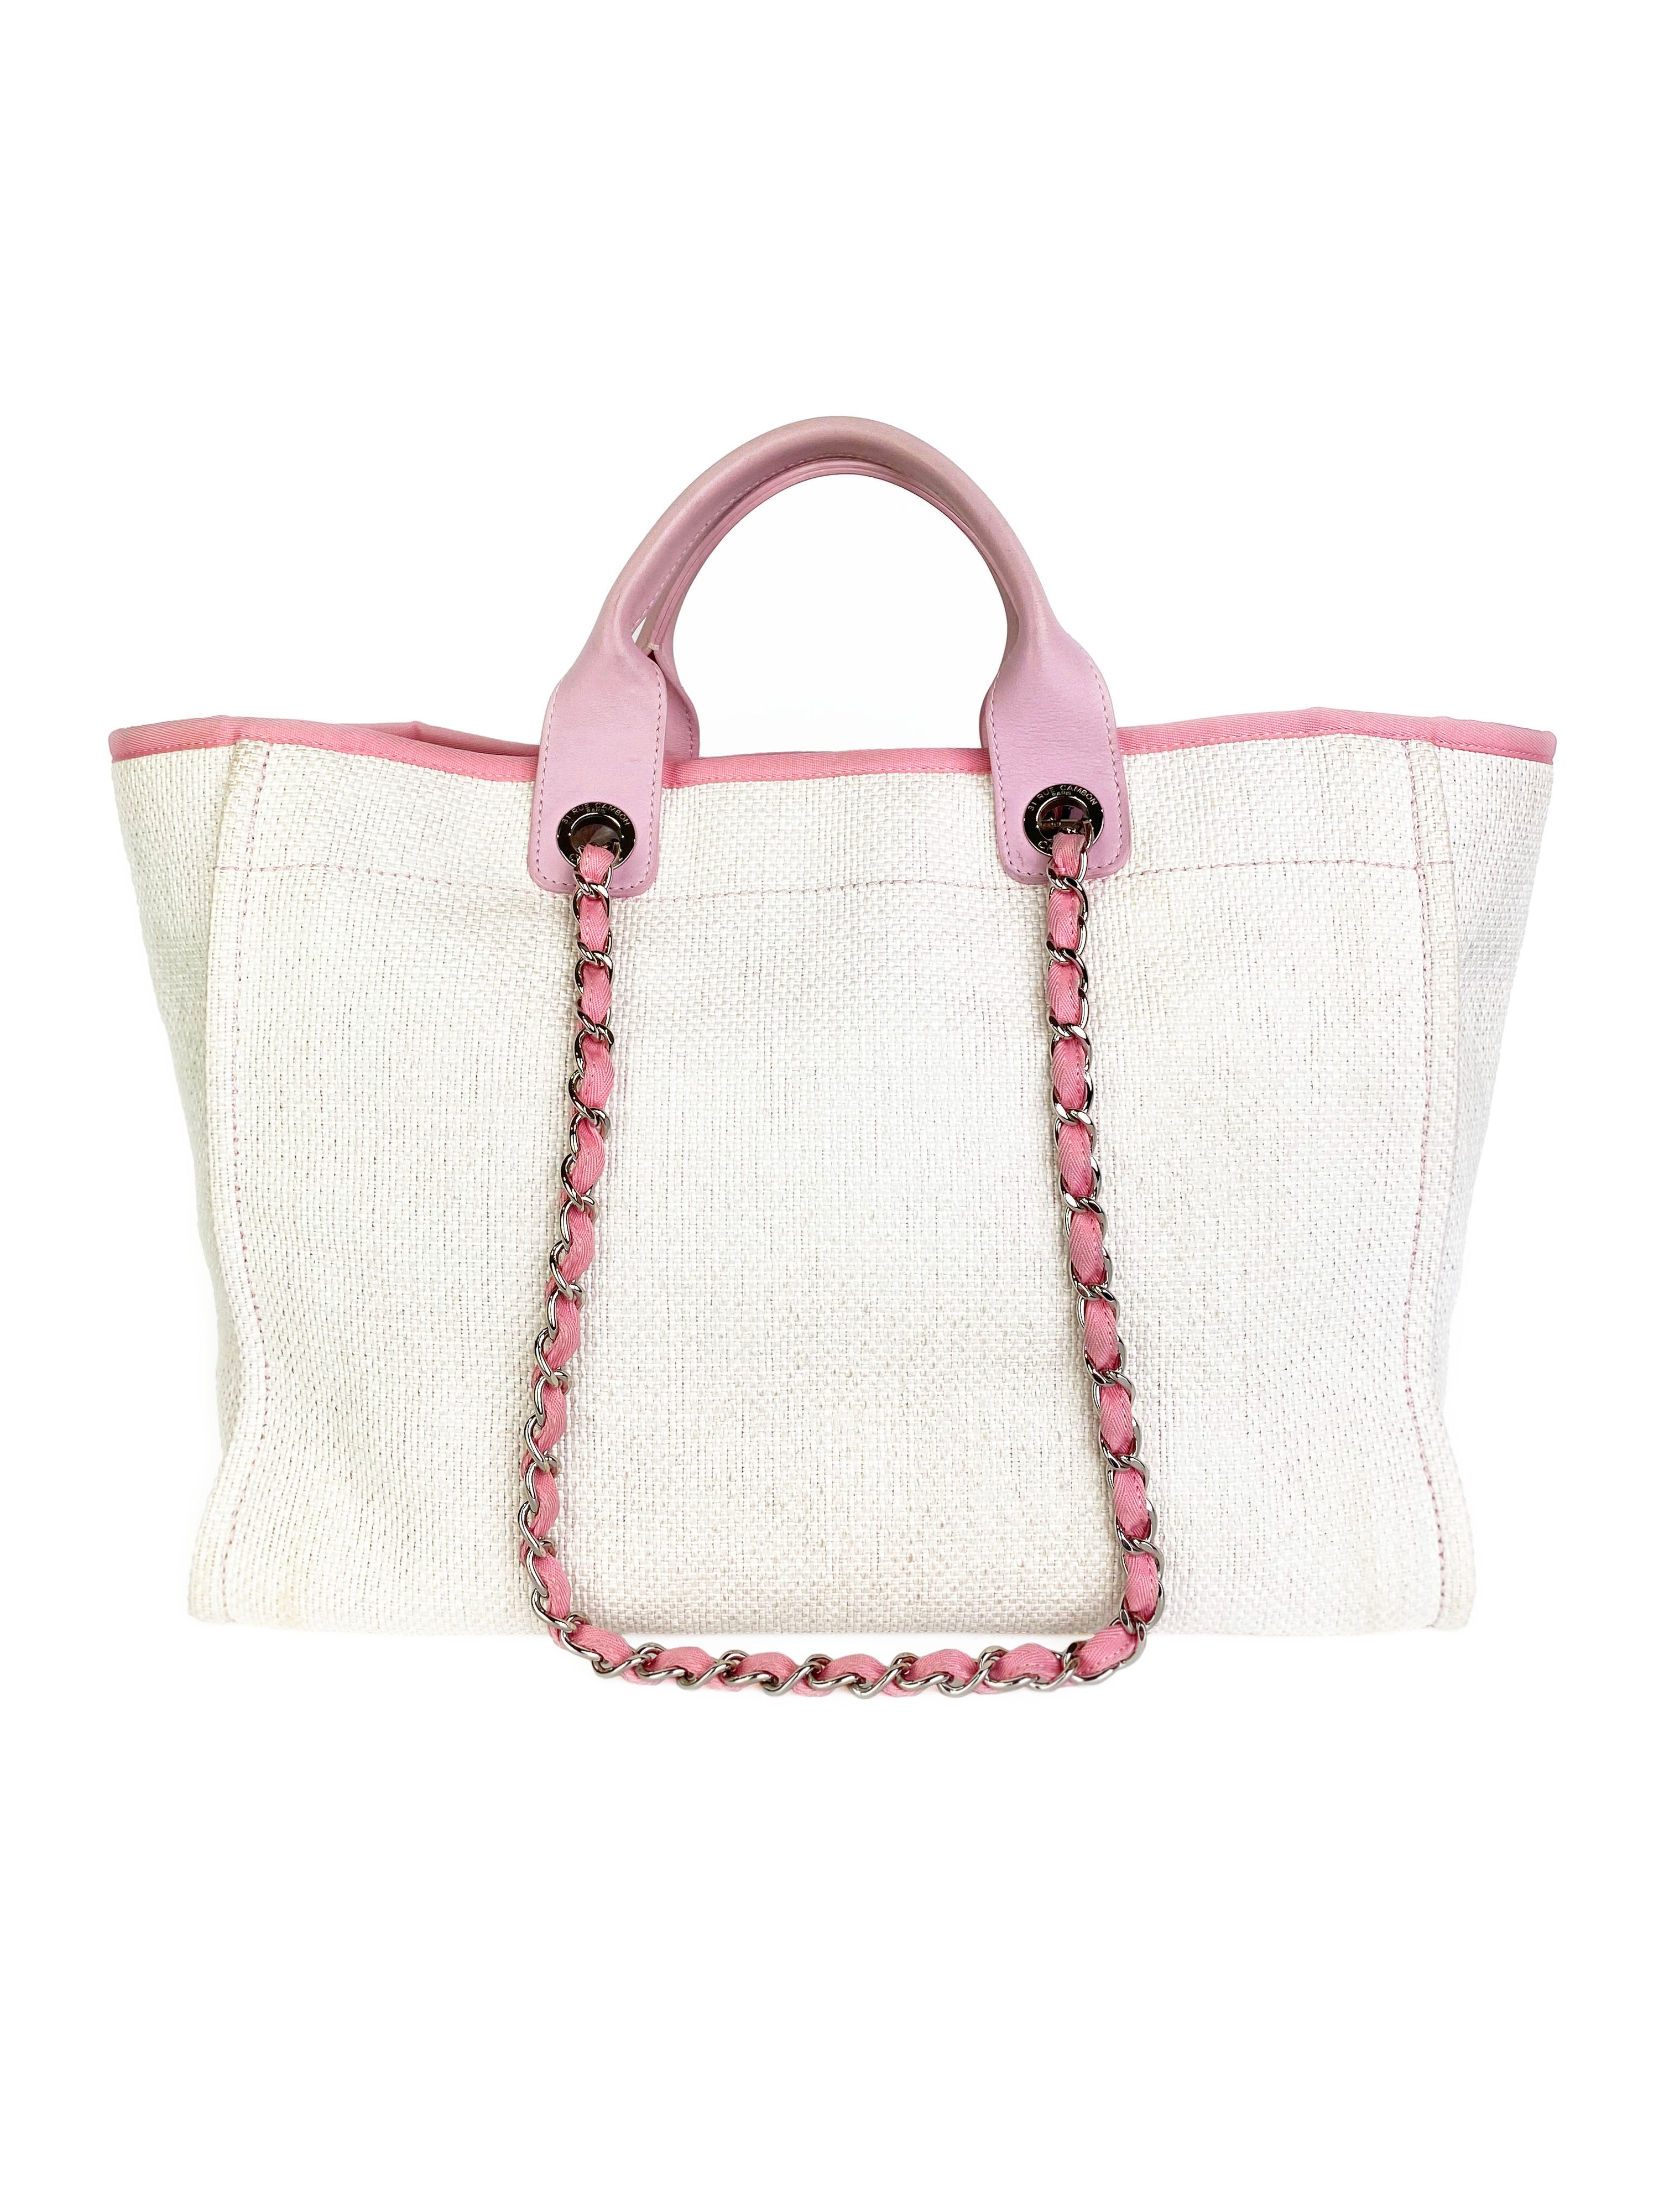 Chanel Pink & White Deauville Tote